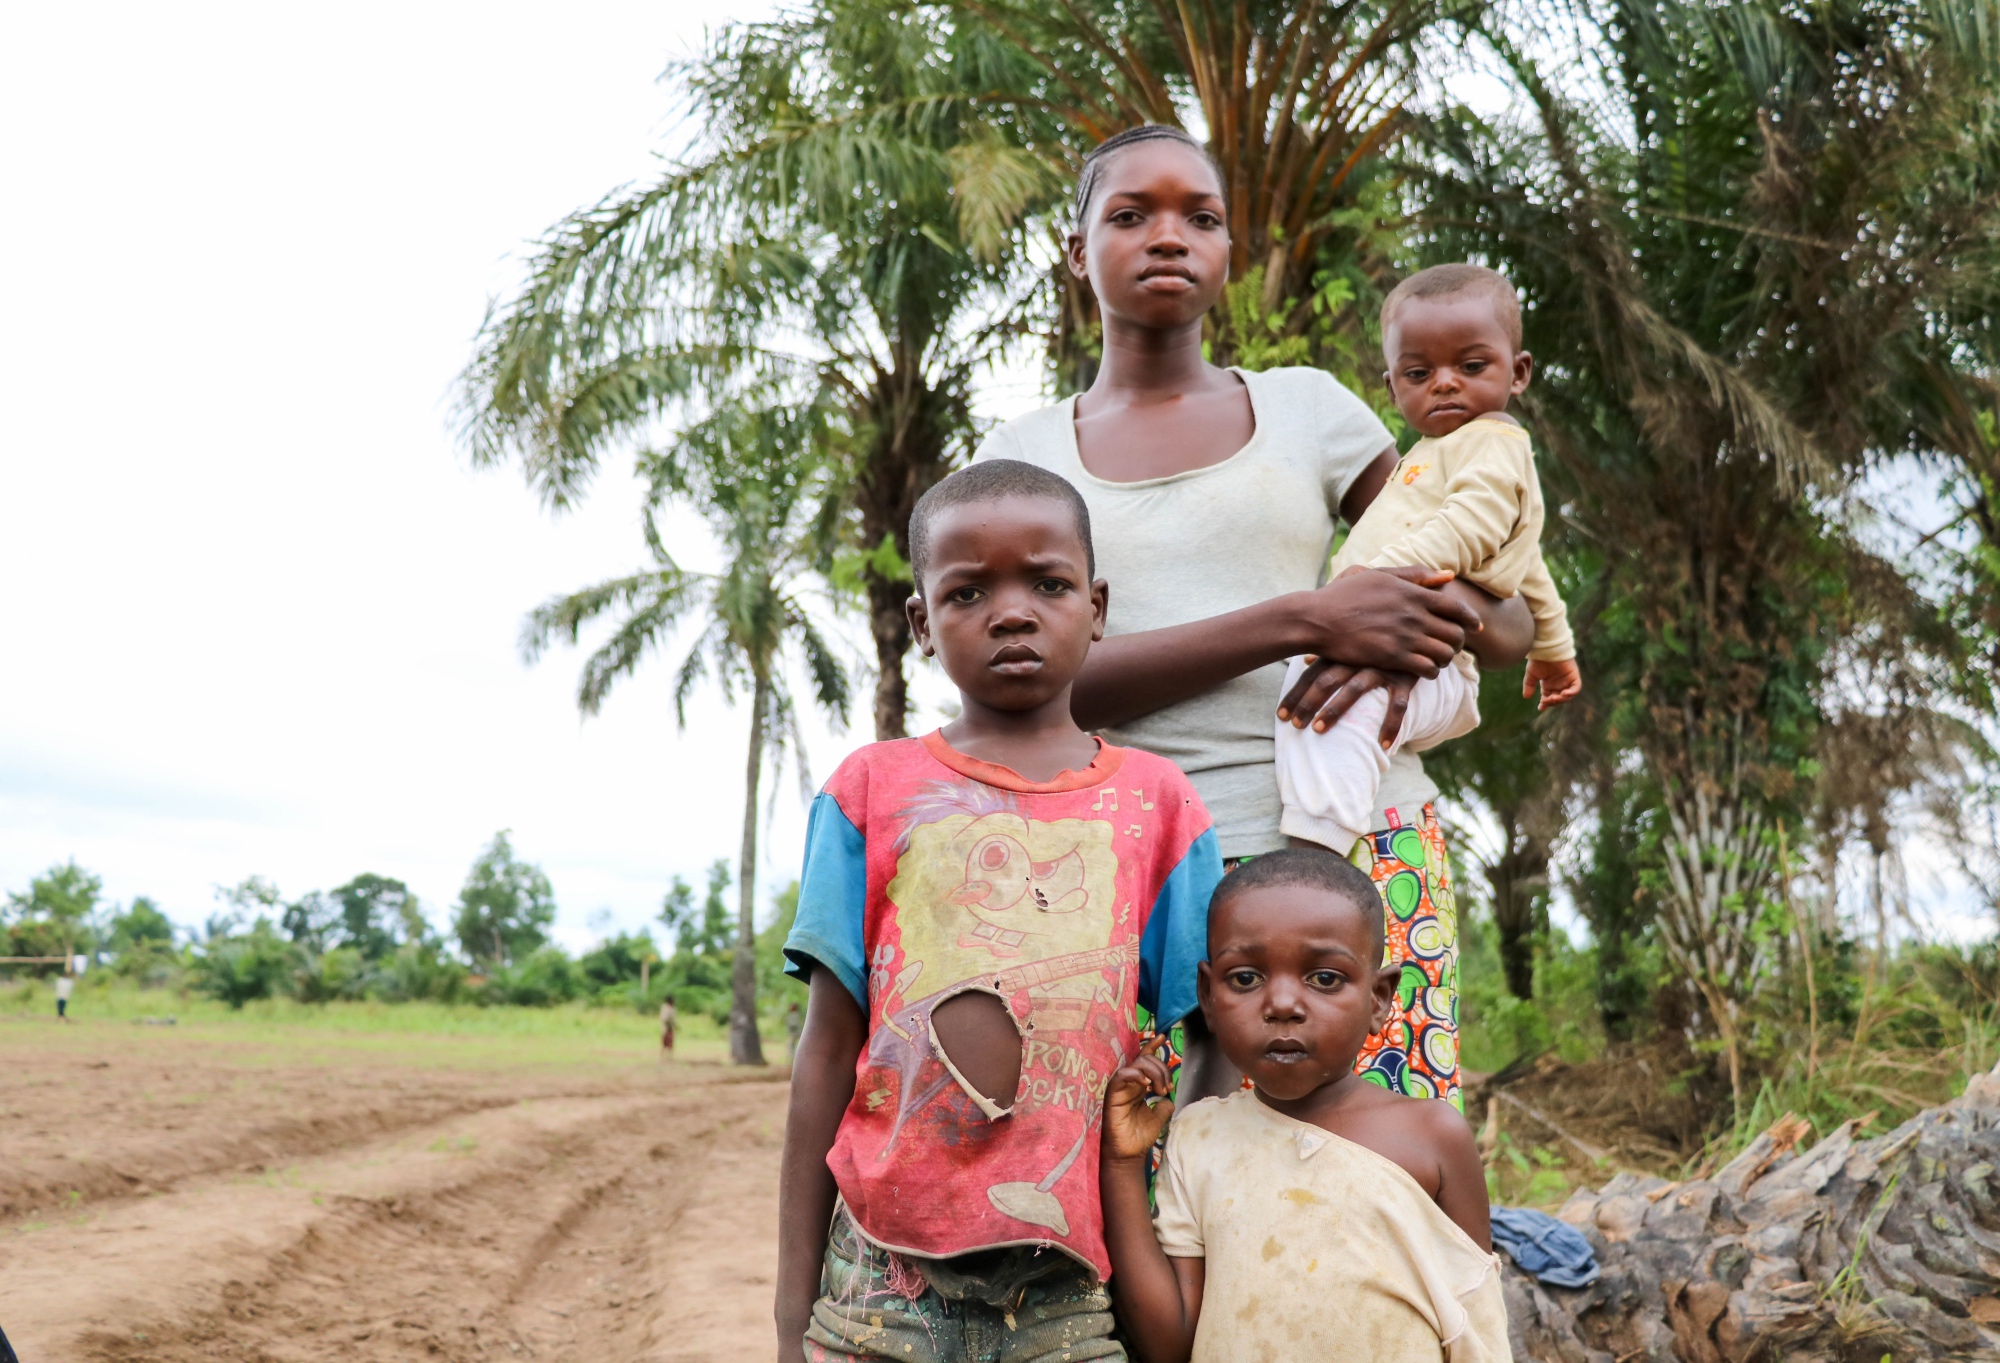 Julie’s husband drowned fleeing the violence this May, leaving her struggling to care for her children Albert (8 months), Charles (12), and Francoise (4). With the loss of her husband’s earnings, Julie is no longer able to pay Charles’ school fees.